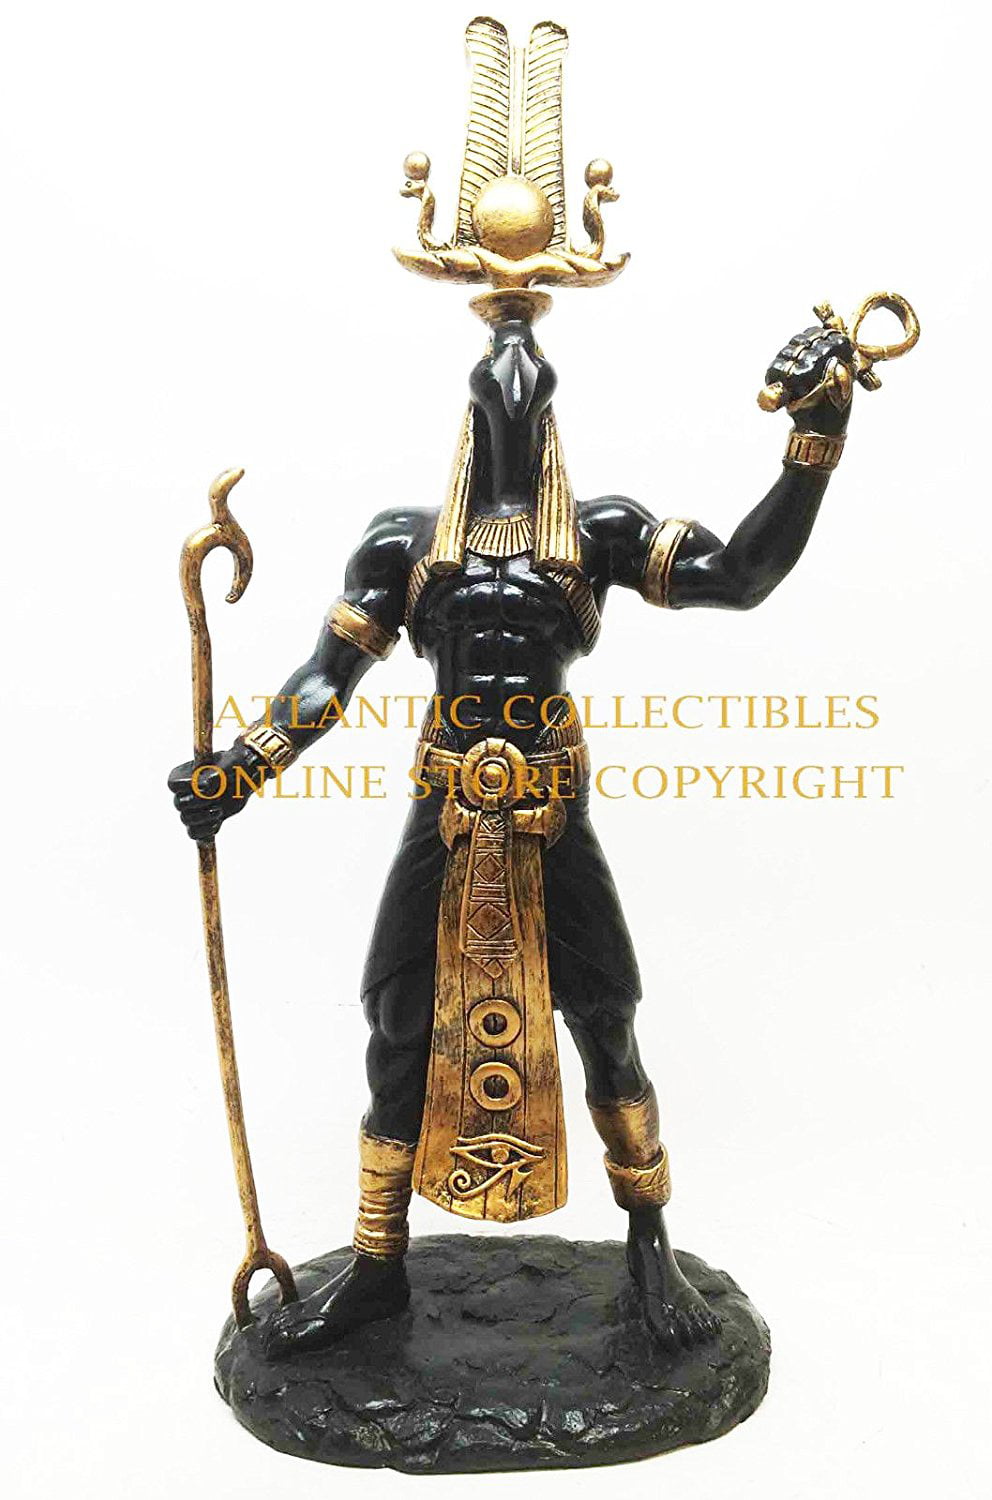 EGYPTIAN SERIES THOTH GOD FIGURINE 11" HEIGHT FIGURINE BY PACIFIC GIFT 